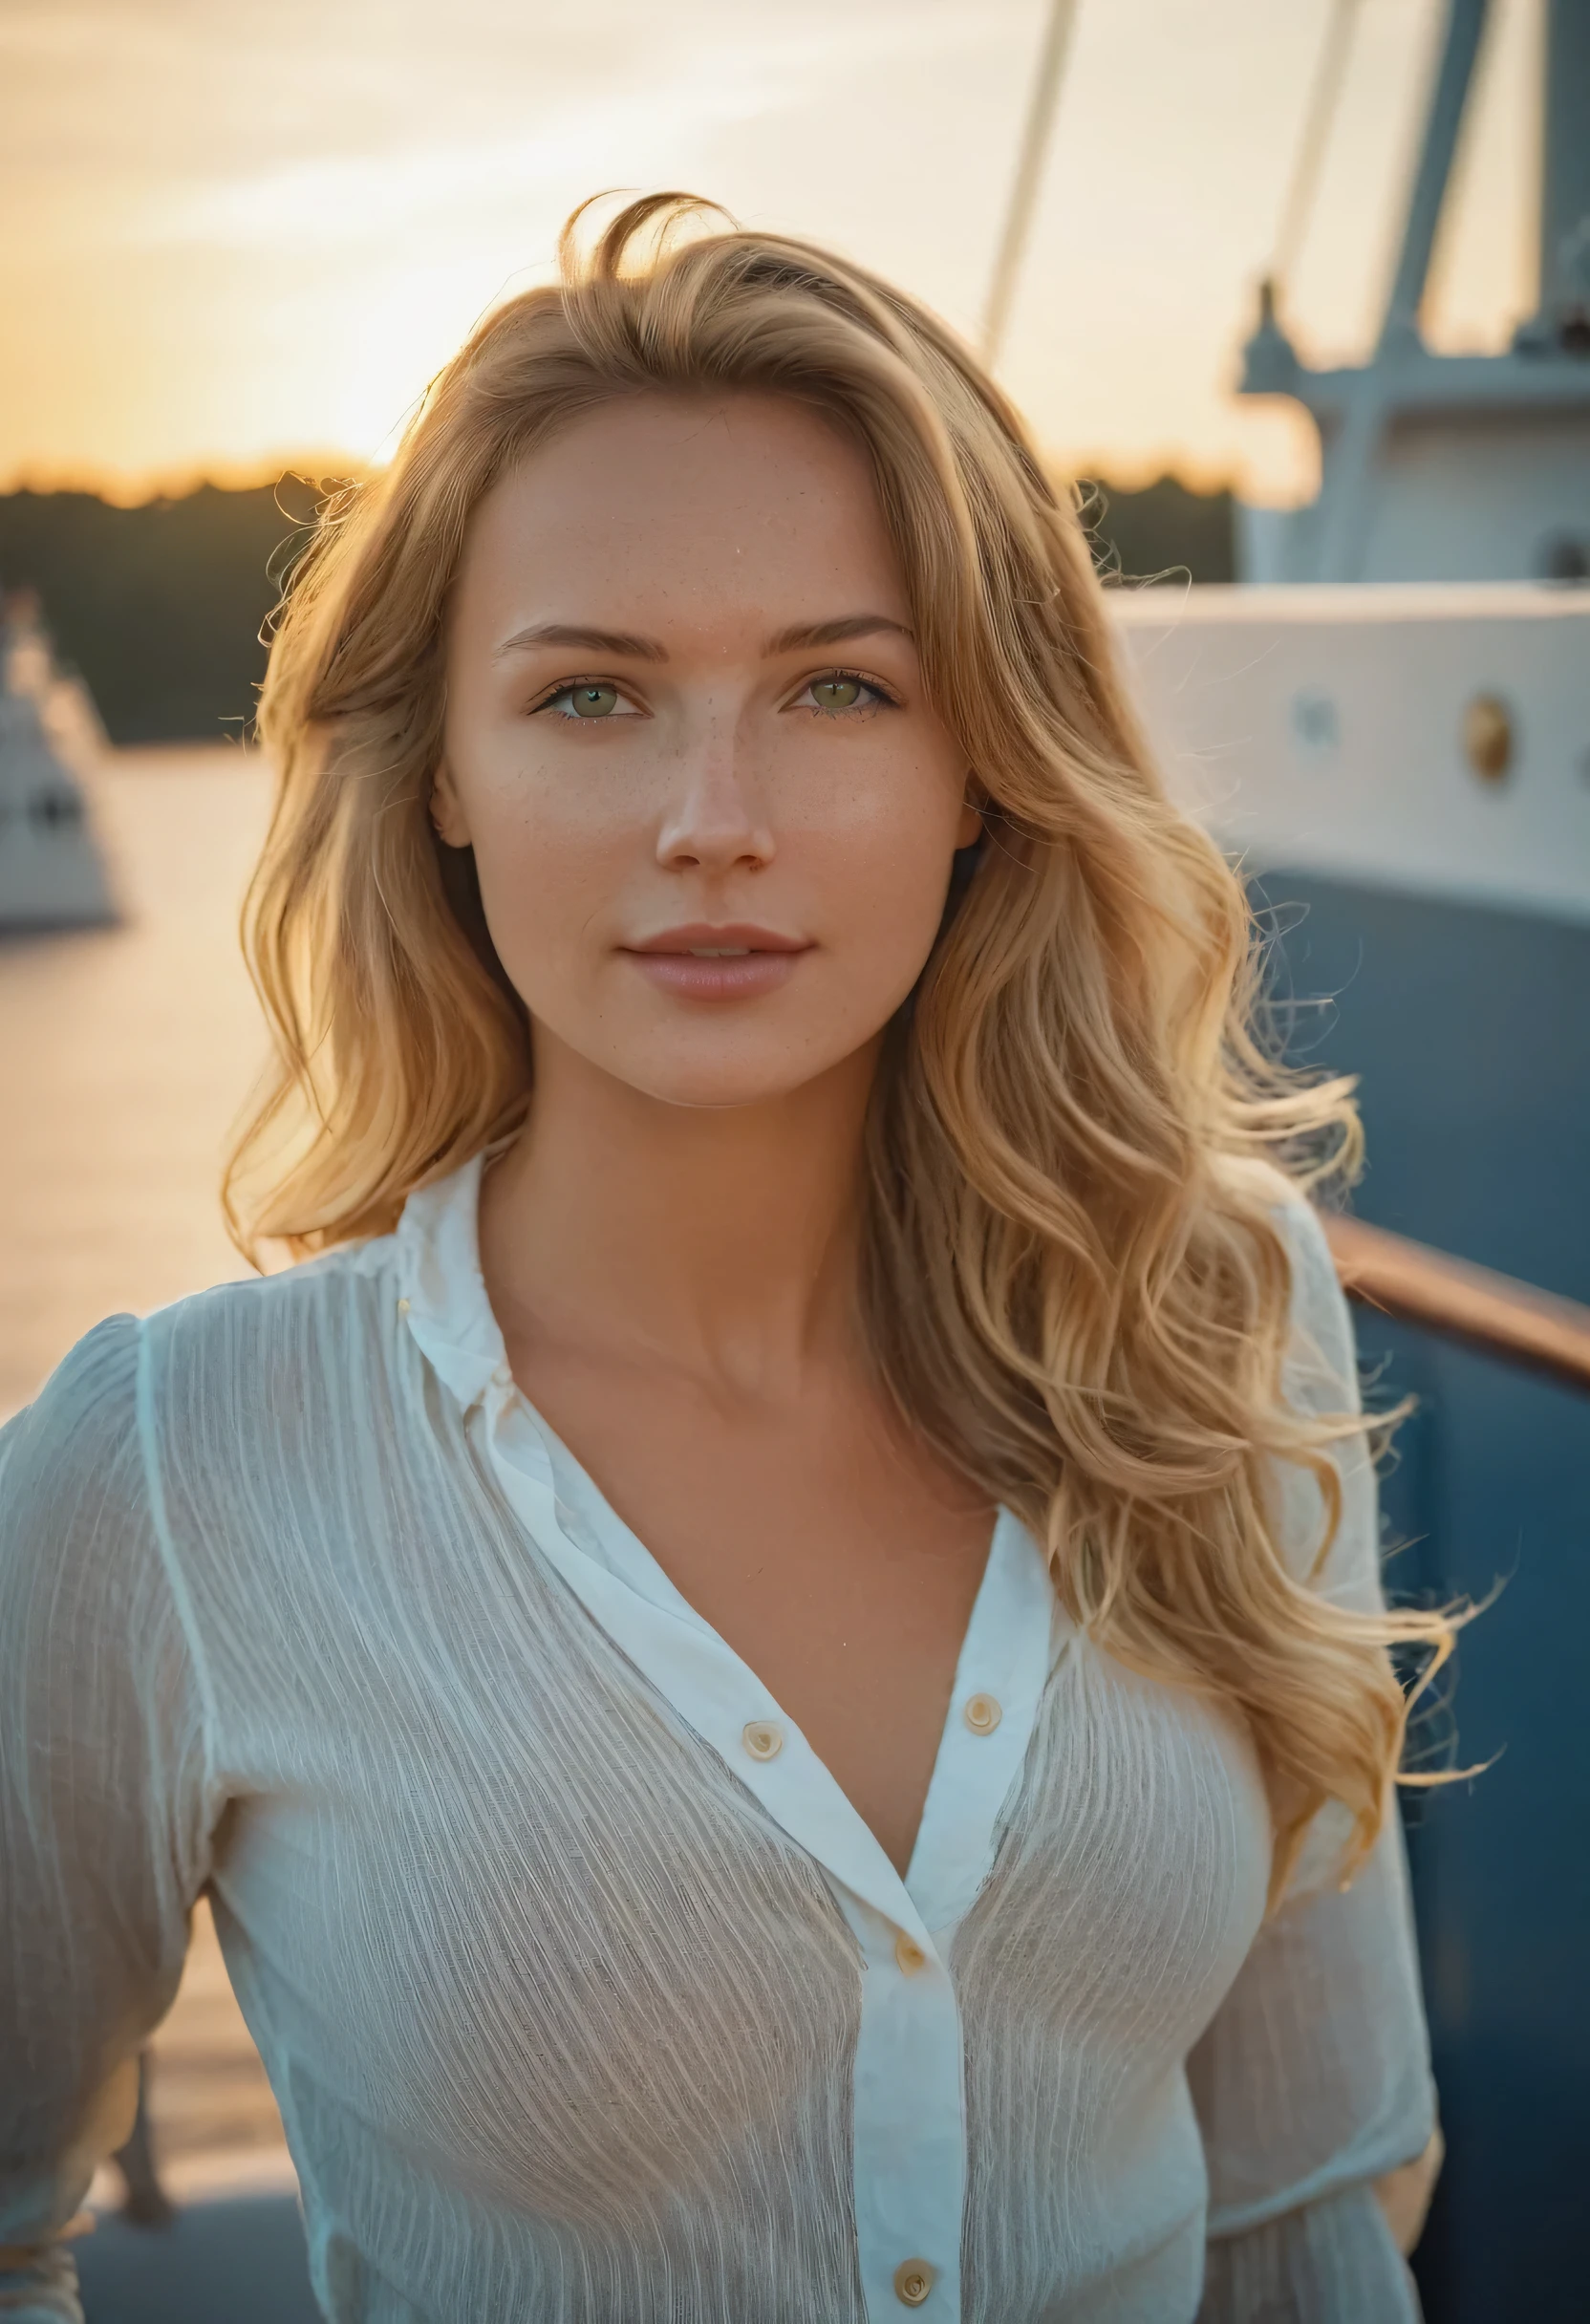 A 22 years old Ukrainian-Sweden lady in casual clothes, dressed in a soft, tight blouse and high-waisted jeans, with sun-kissed loose wavy hair, full lips, hazel eyes, sensual, looking straight into the camera, standing on the ship, early morning casting the soft glow, excluding serenity, photography, DSLR camera with 50 mm lens, f/1.8 aperture for a shallow depth of field